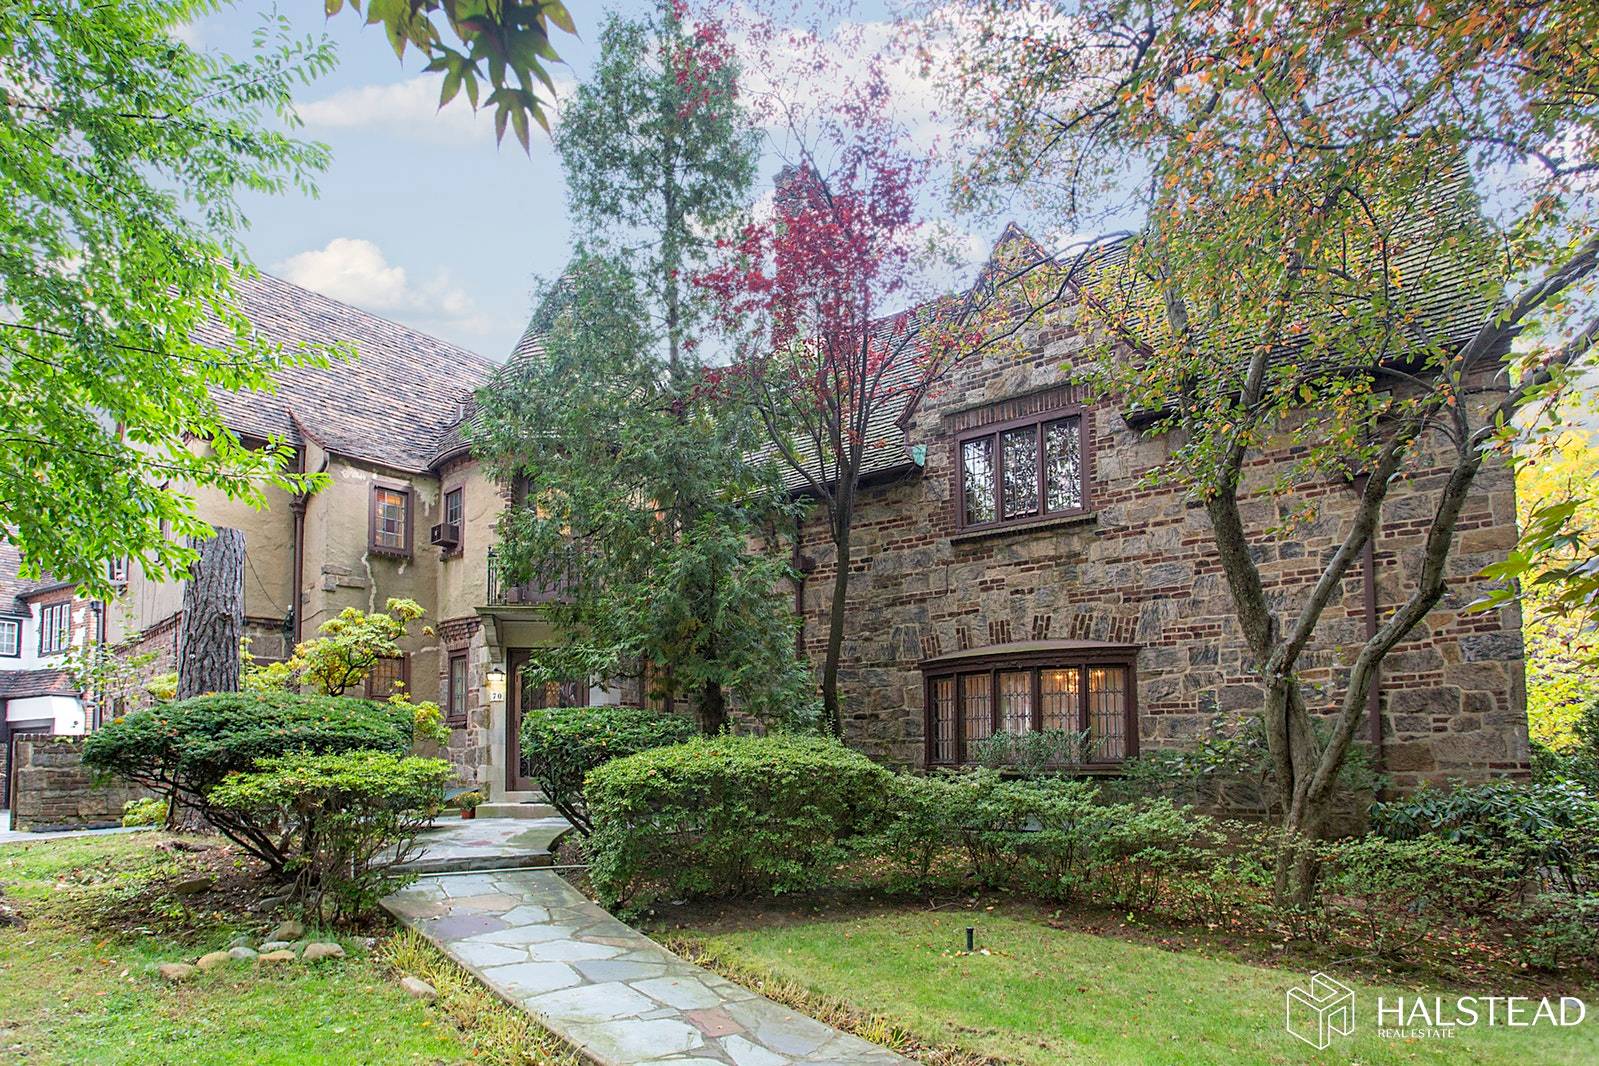 This stunning Tudor was awarded First Prize for excellence in design and civic value in 1929.